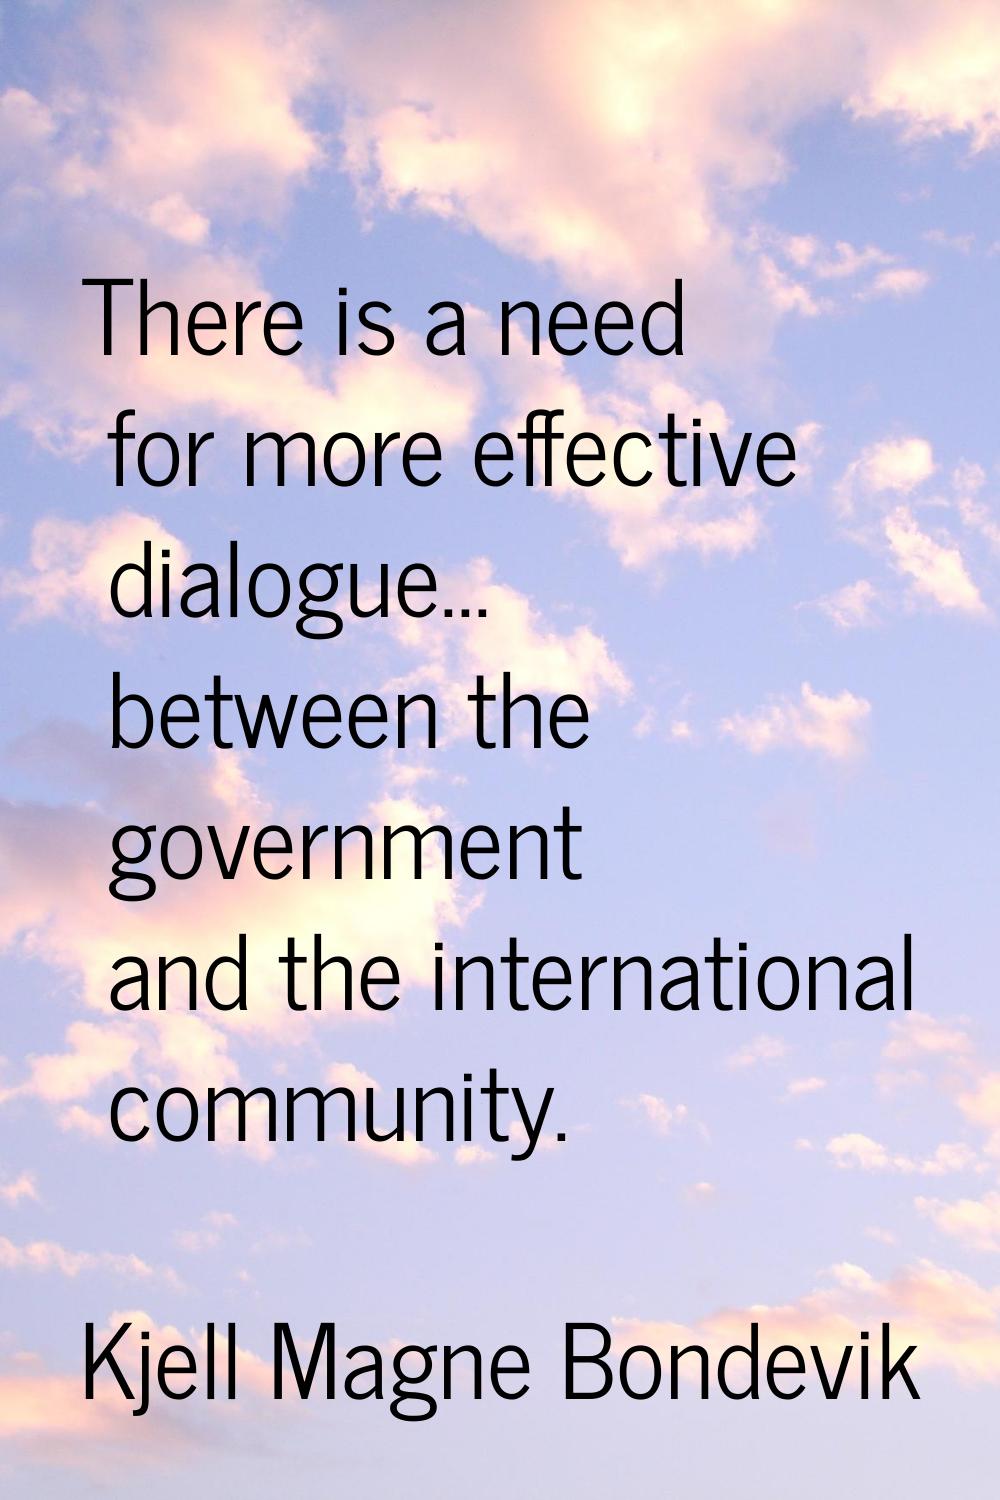 There is a need for more effective dialogue... between the government and the international communi